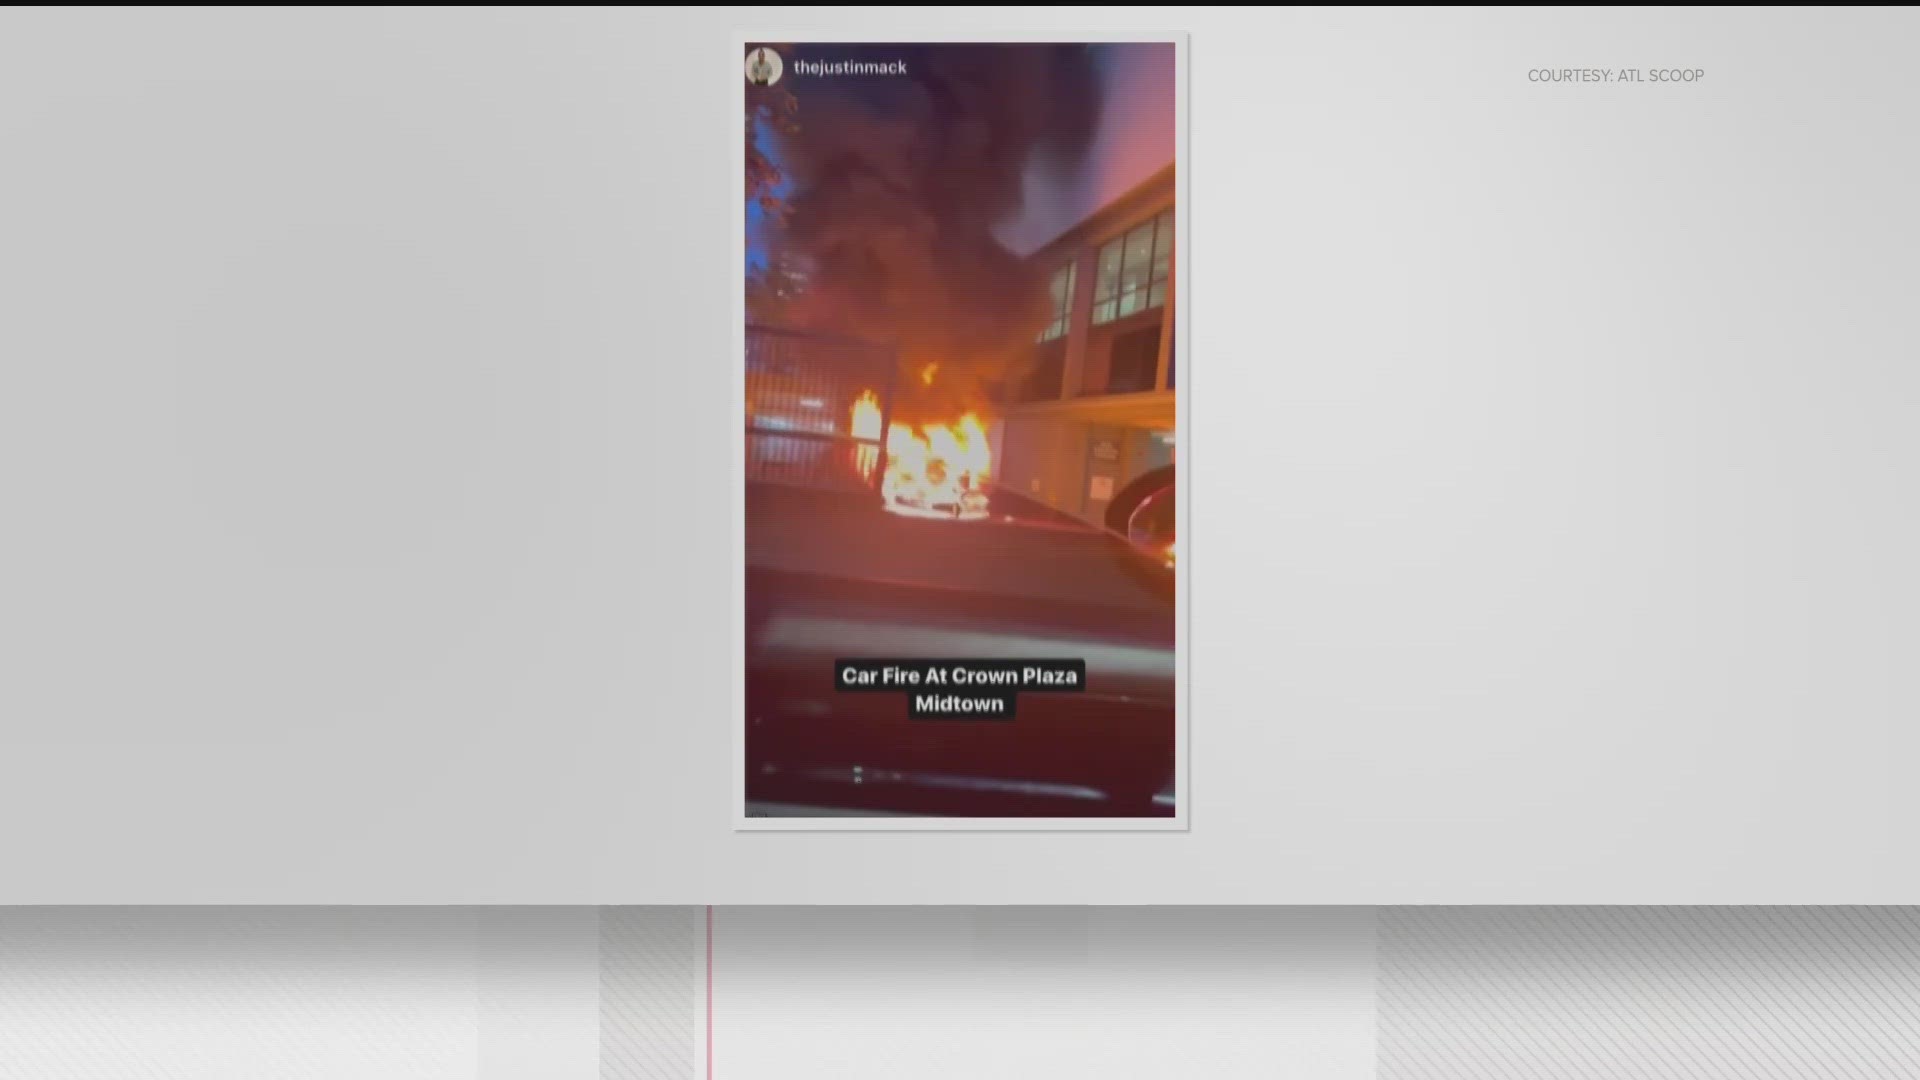 11Alive obtained video, which appears to show a car caught fire by Crown Plaza in Midtown around 9:15 p.m.